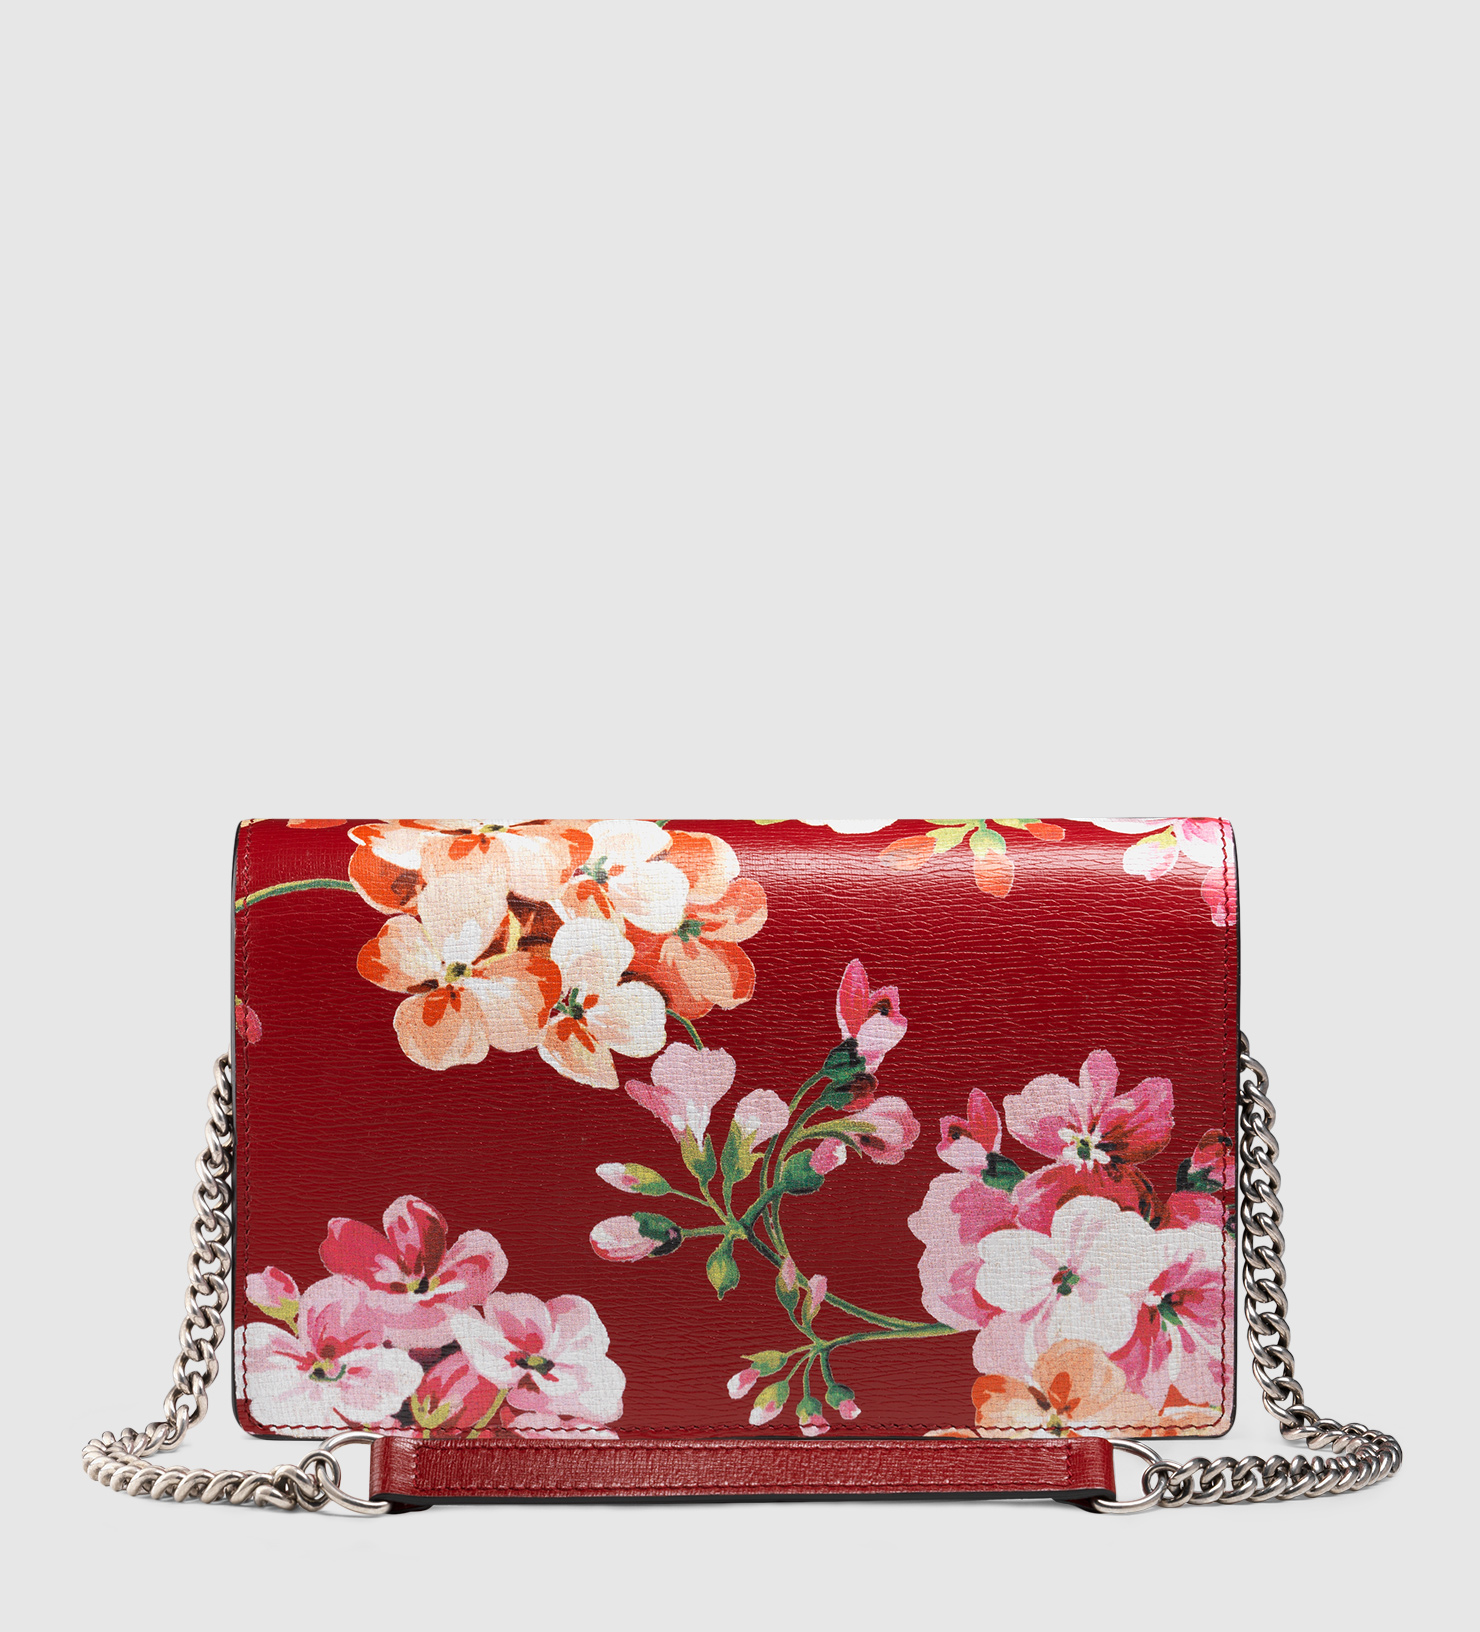 Gucci Blooms Leather Chain Wallet in Pink - Lyst